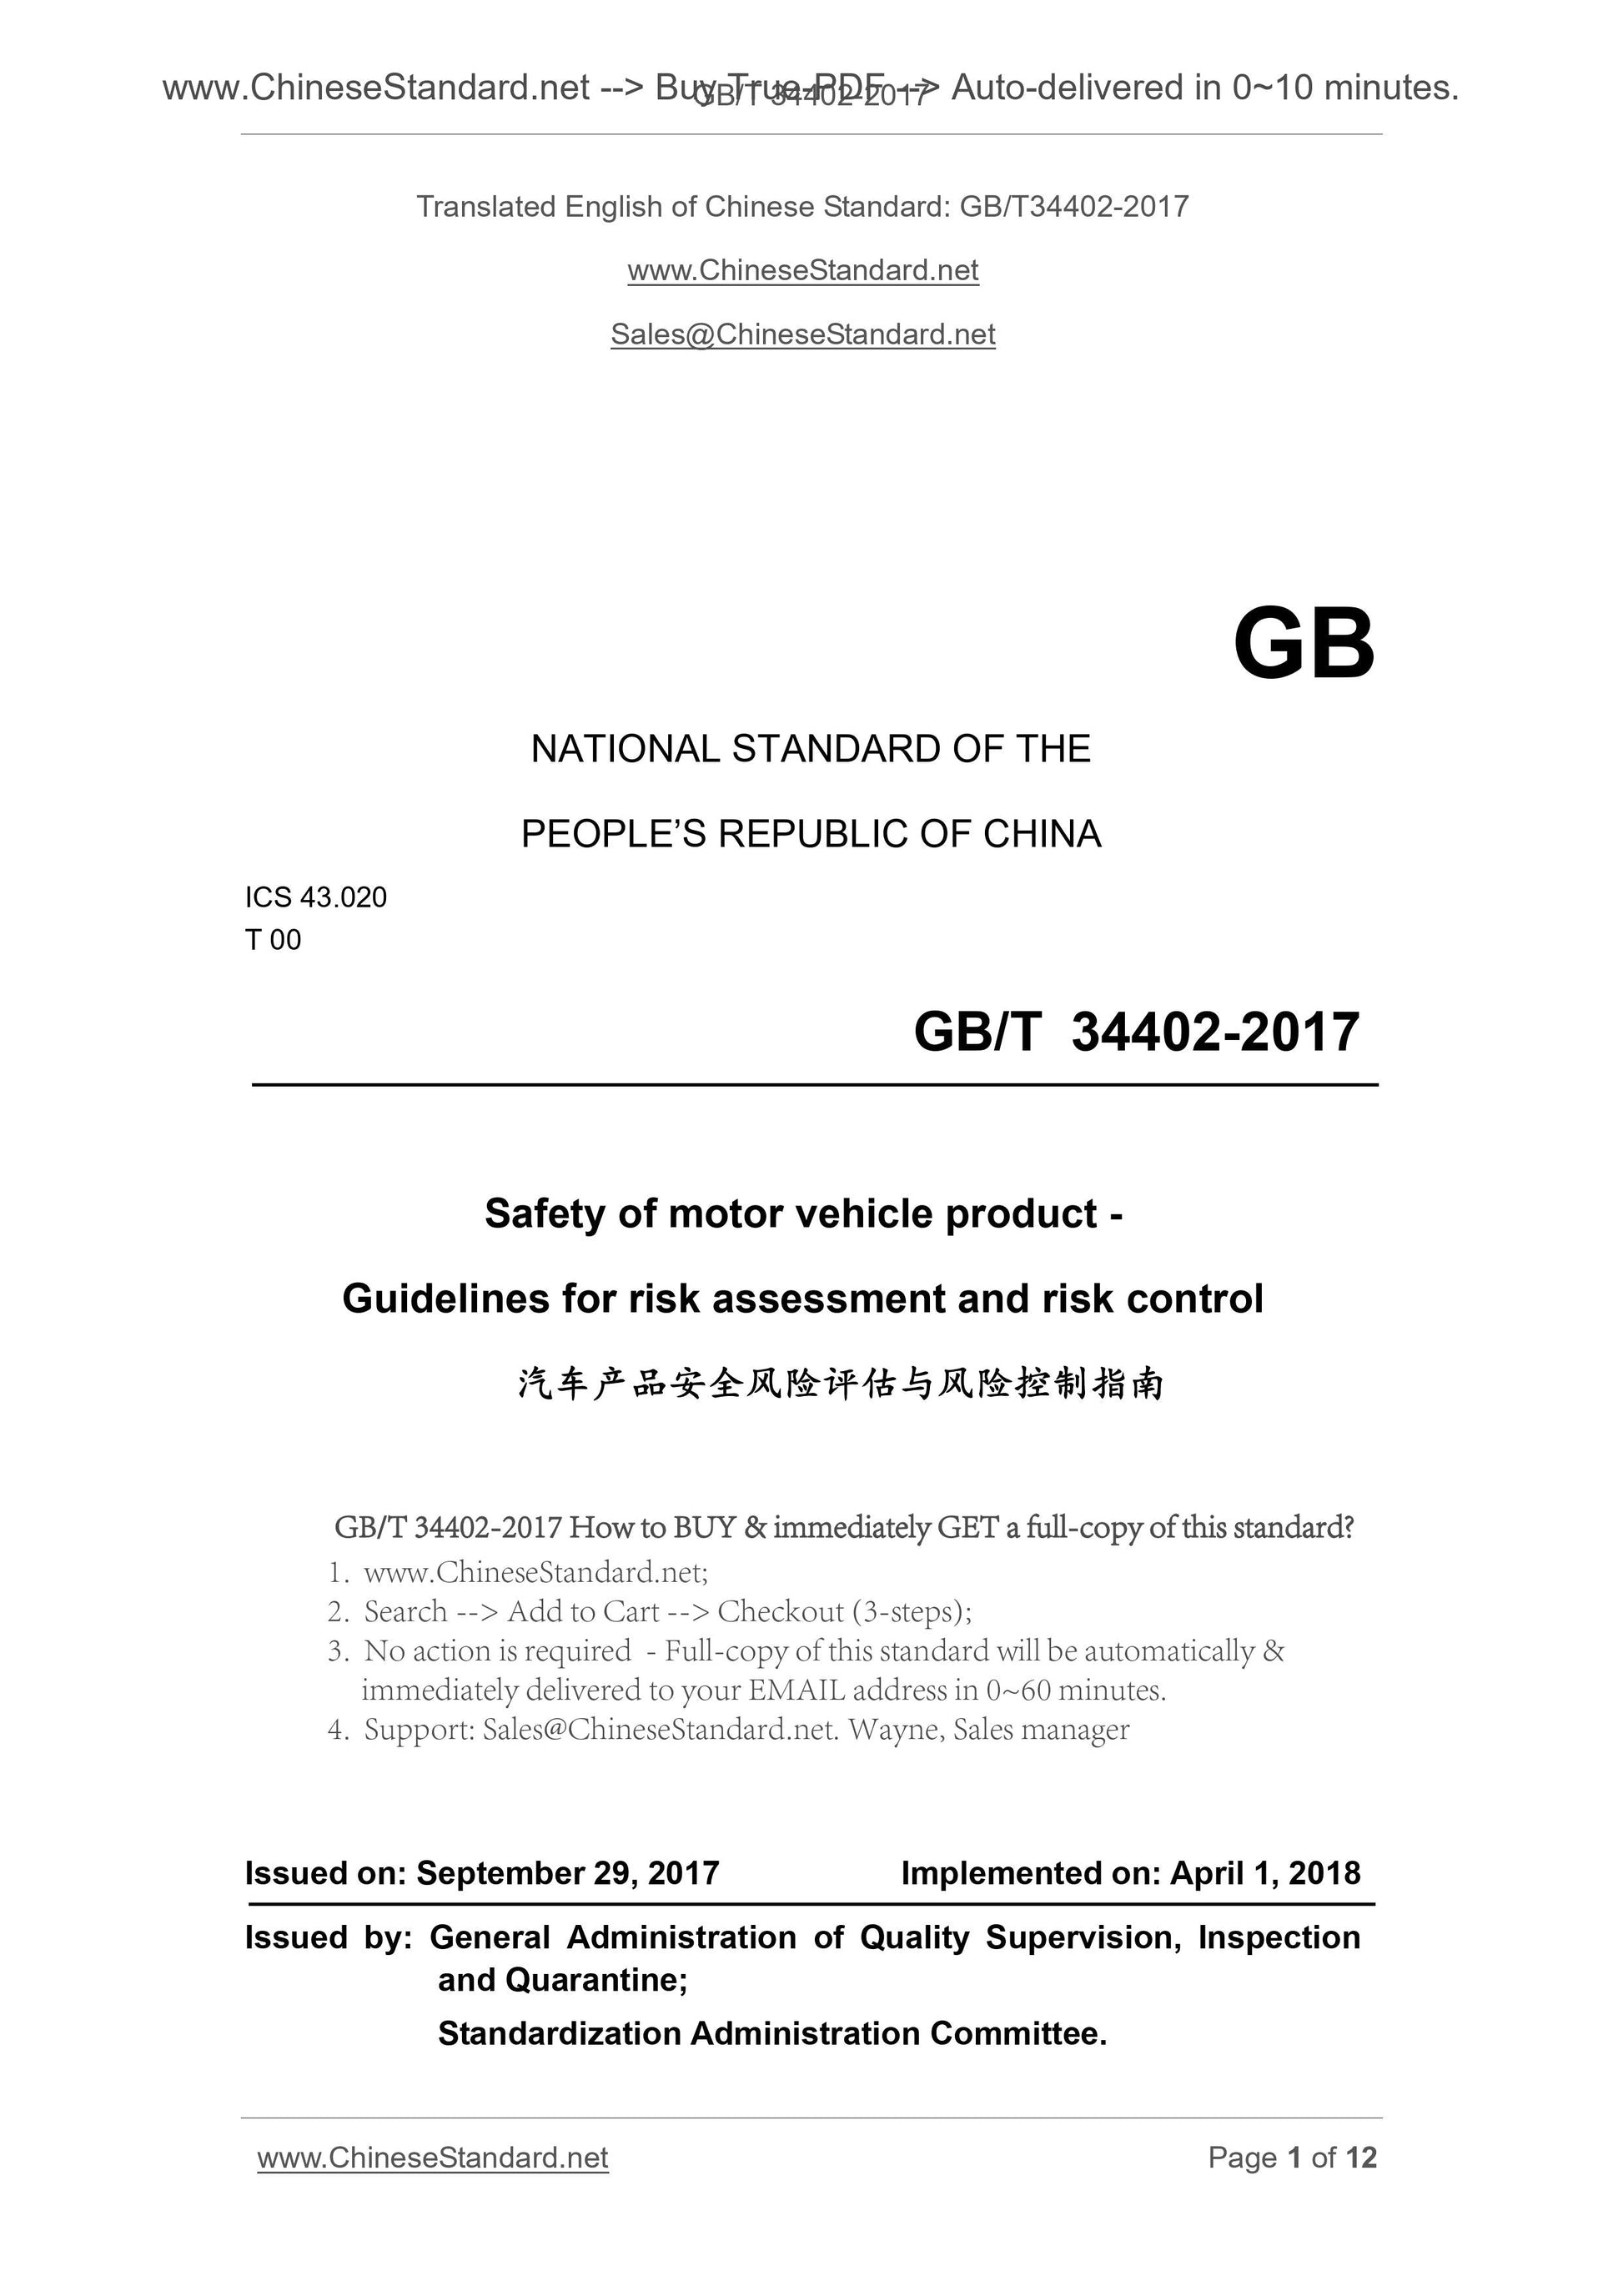 GB/T 34402-2017 Page 1